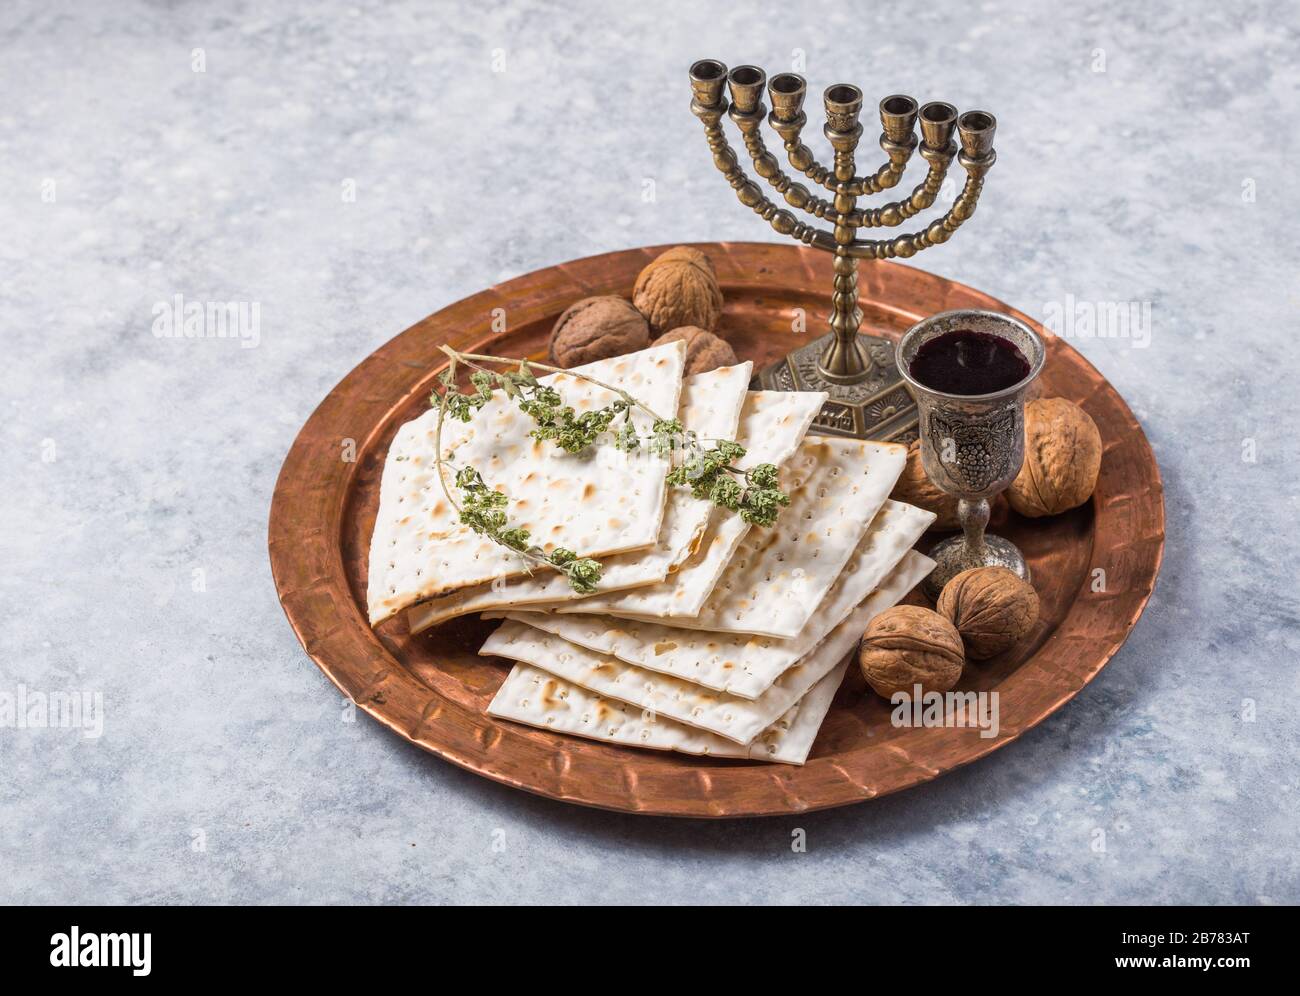 Passover, the Feast of Unleavened Bread, matzah bread and red wine glasses on the shinny round metal tray. Stock Photo